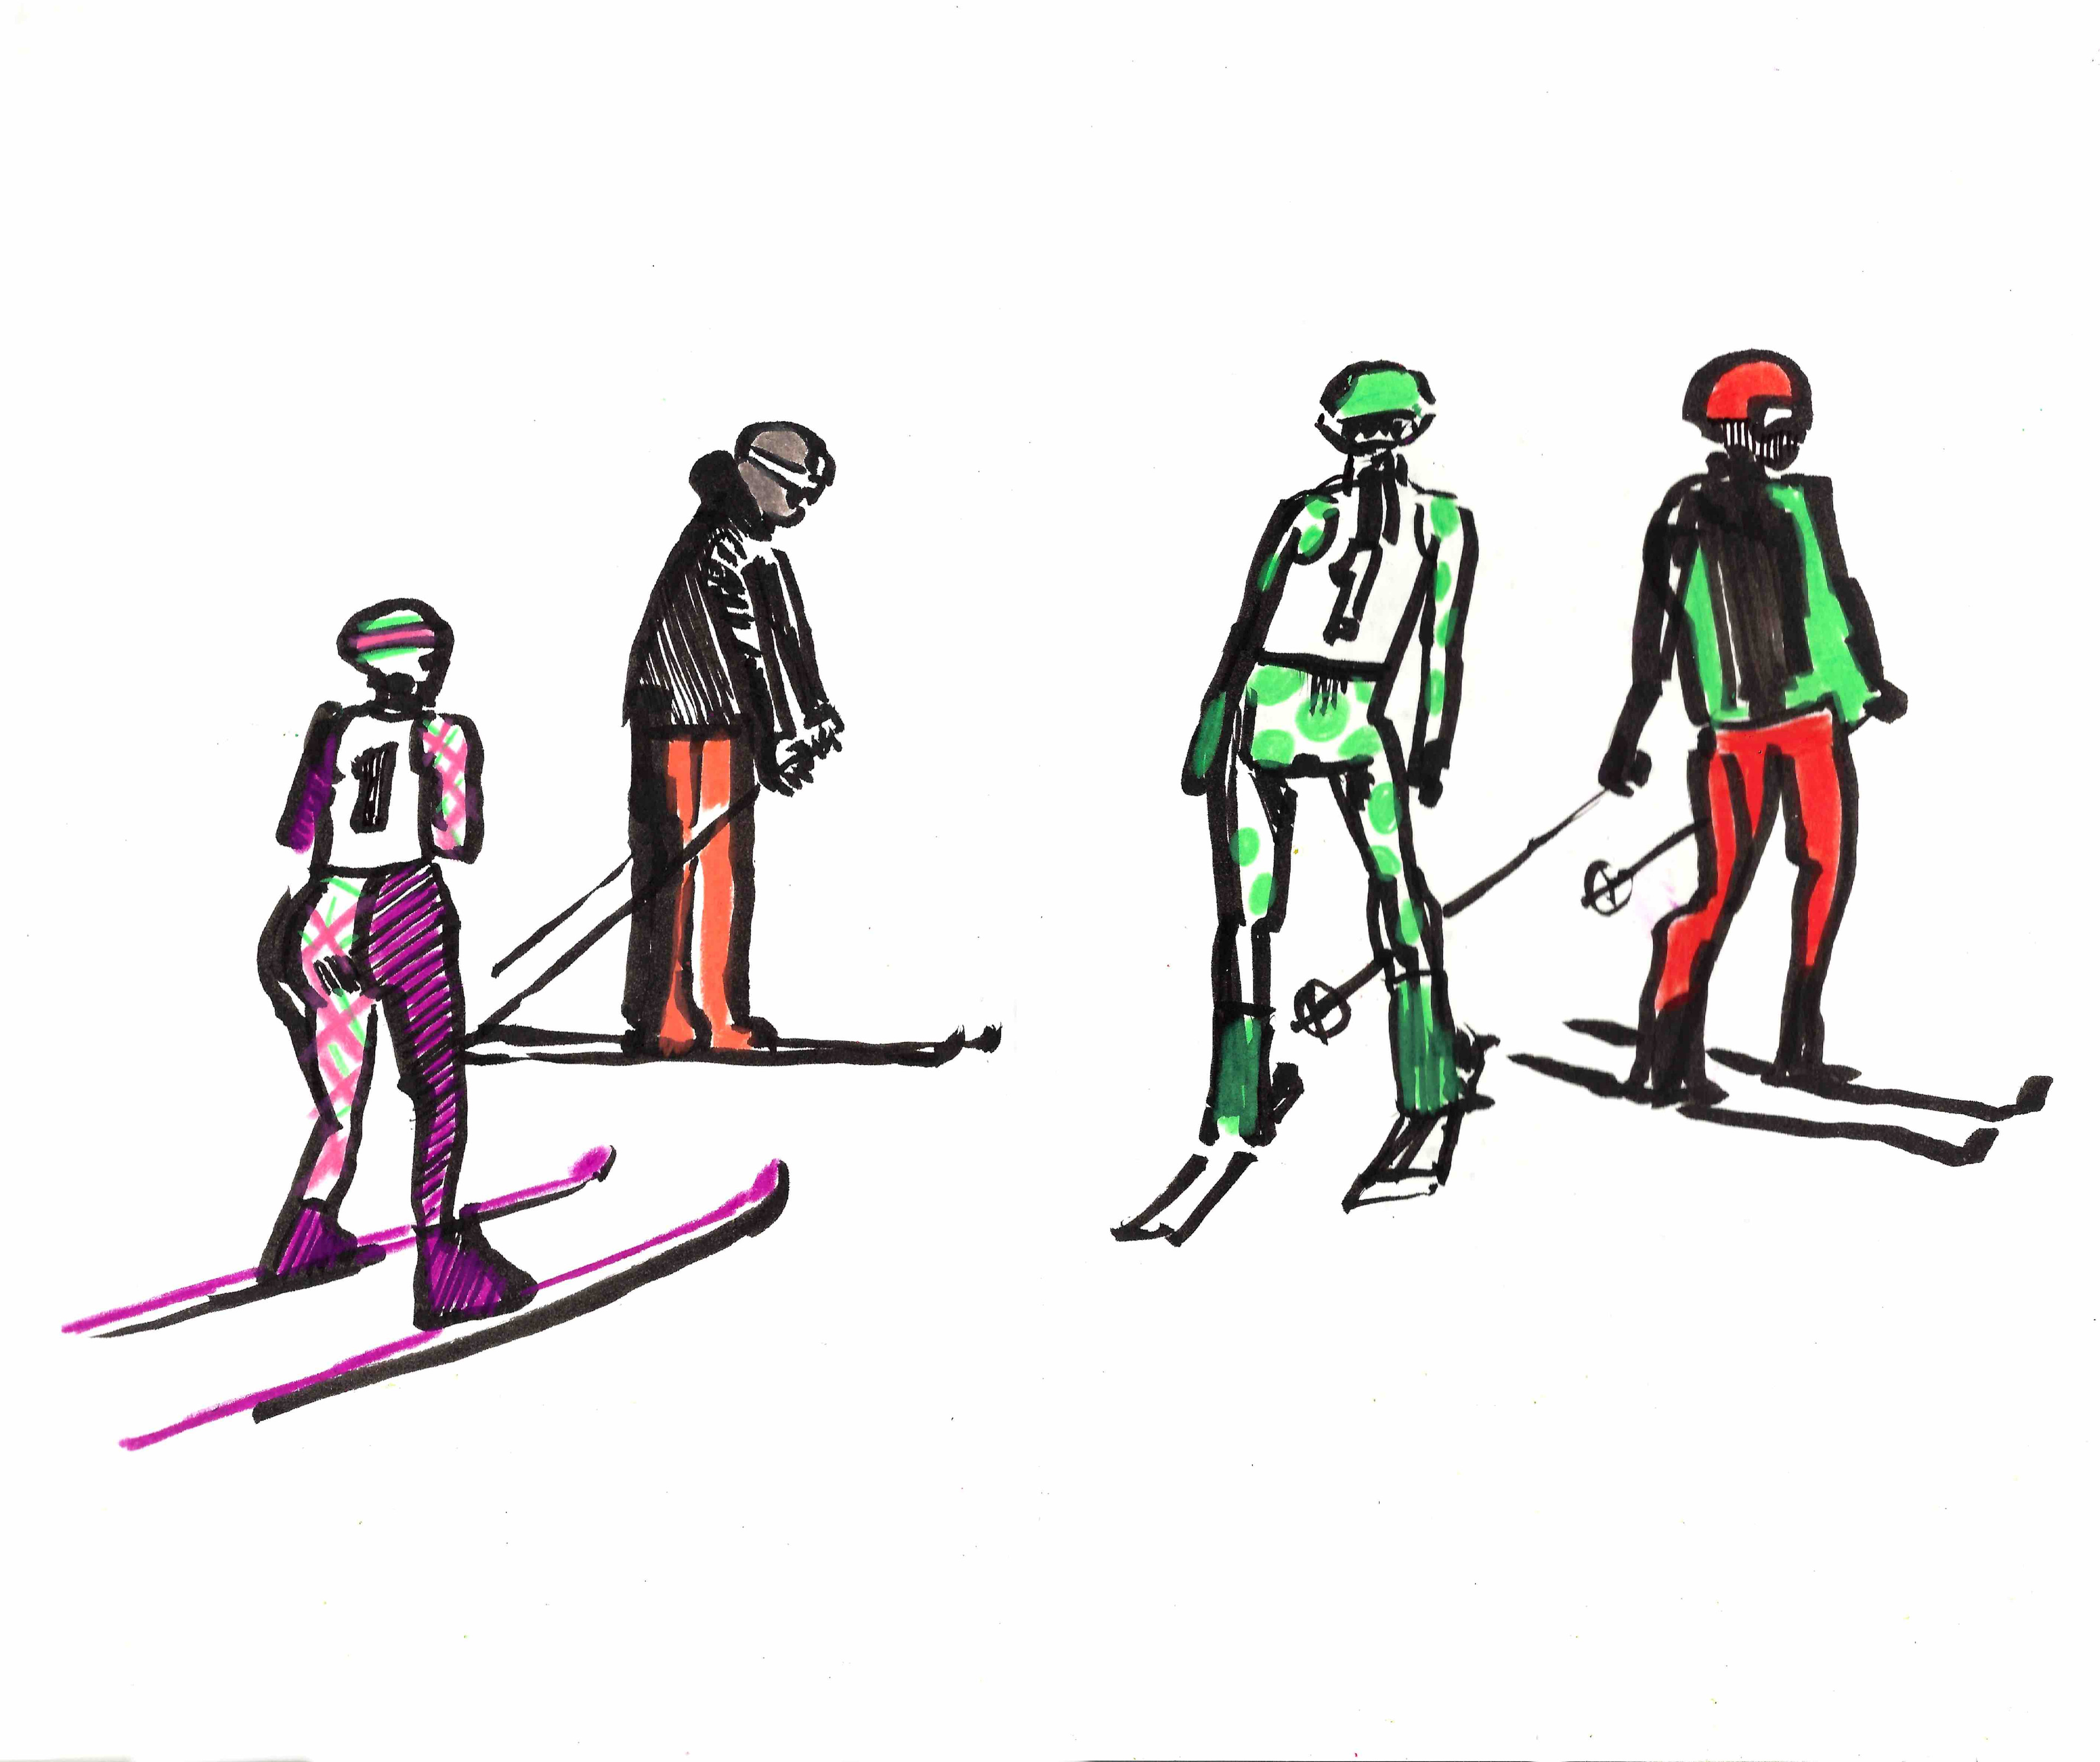 These Skiers were drawn on location. Go out and draw the world as you see it around you.